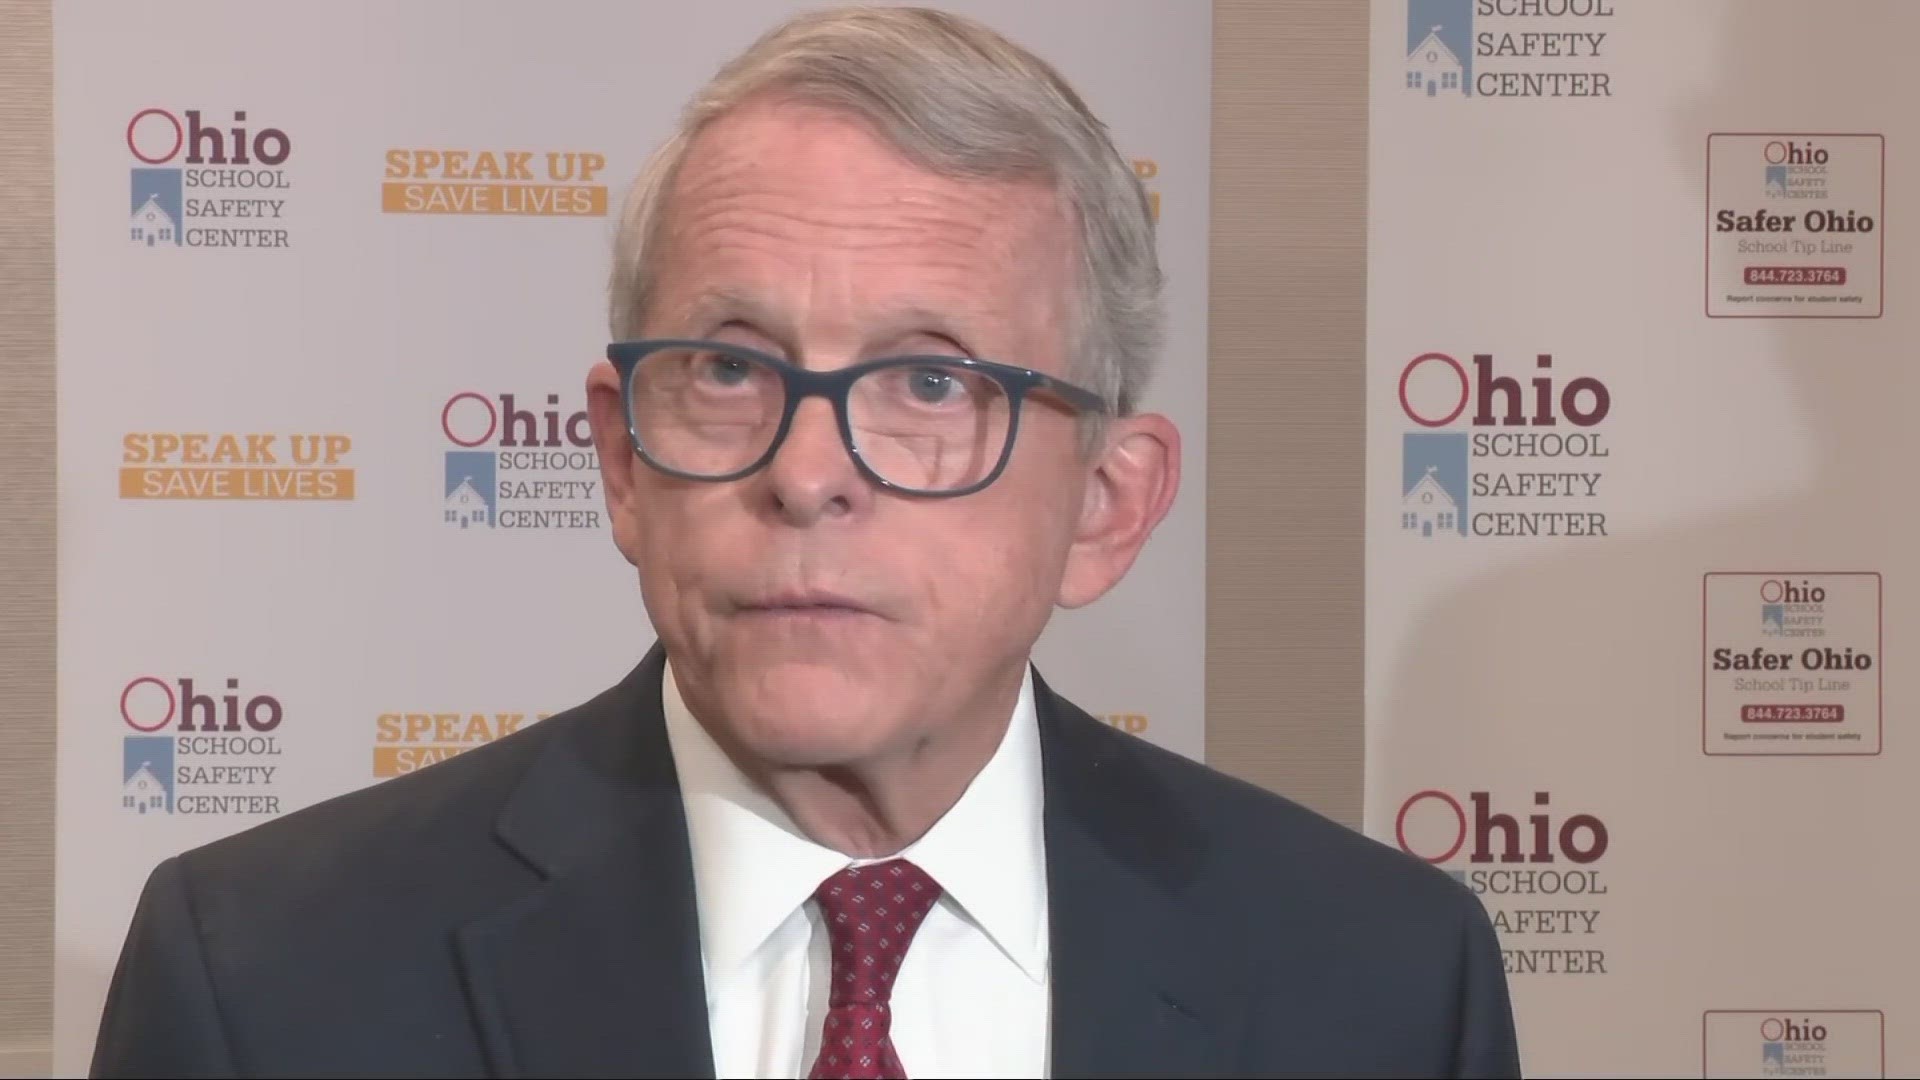 DeWine says he will propose the construction of a scenario-based training facility that will be available to every law enforcement agency in Ohio.